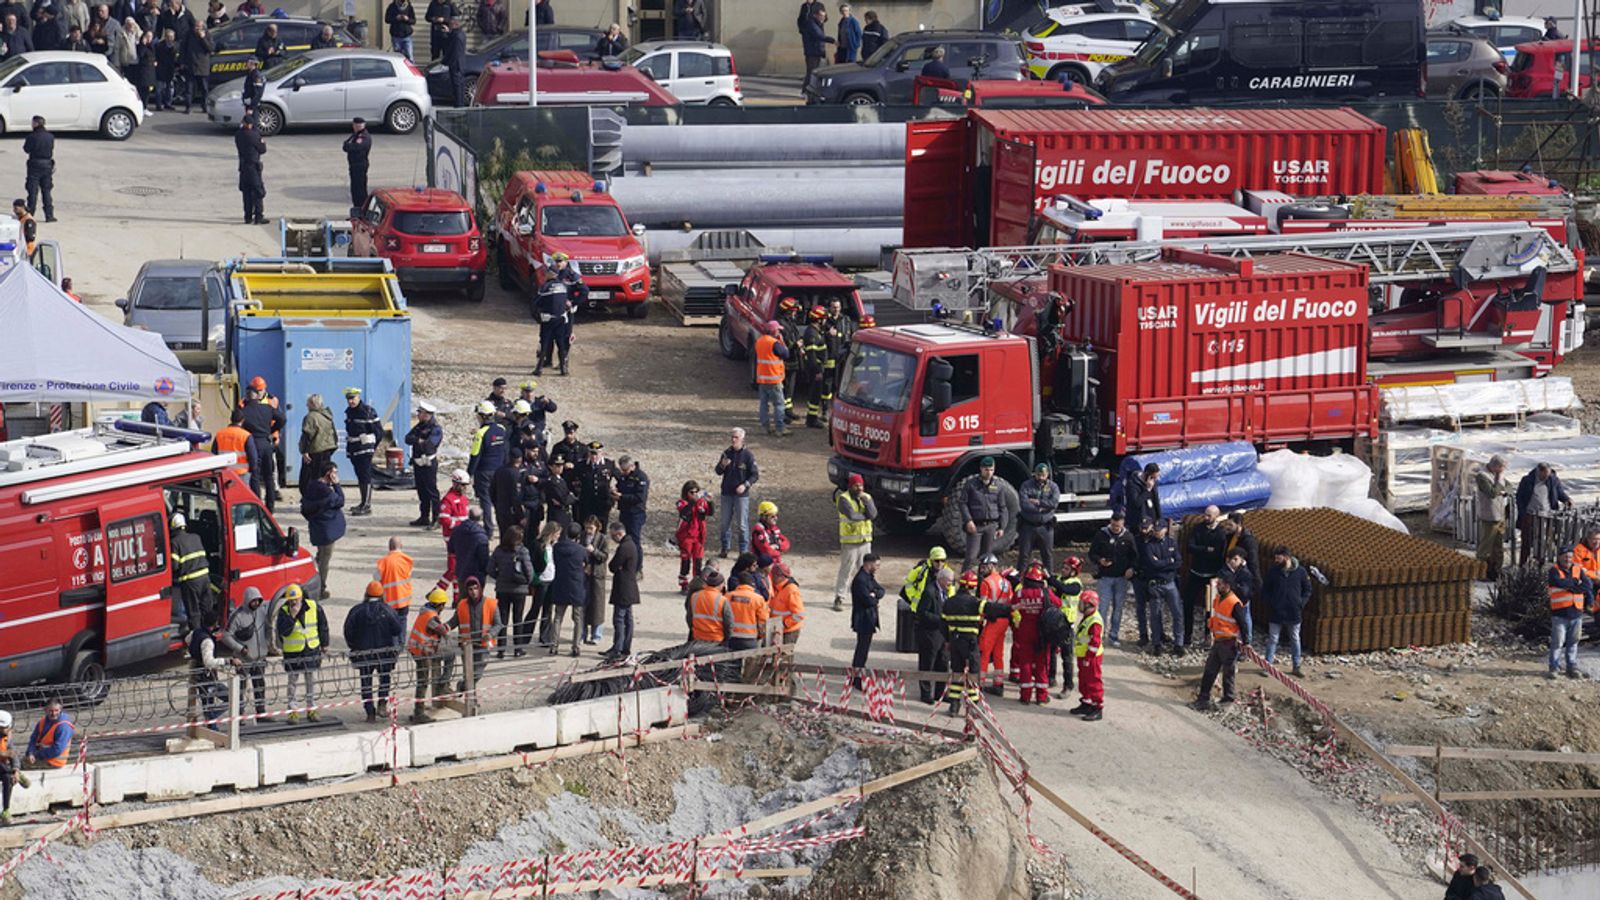 Five dead and three seriously injured after collapse on construction site in Italy